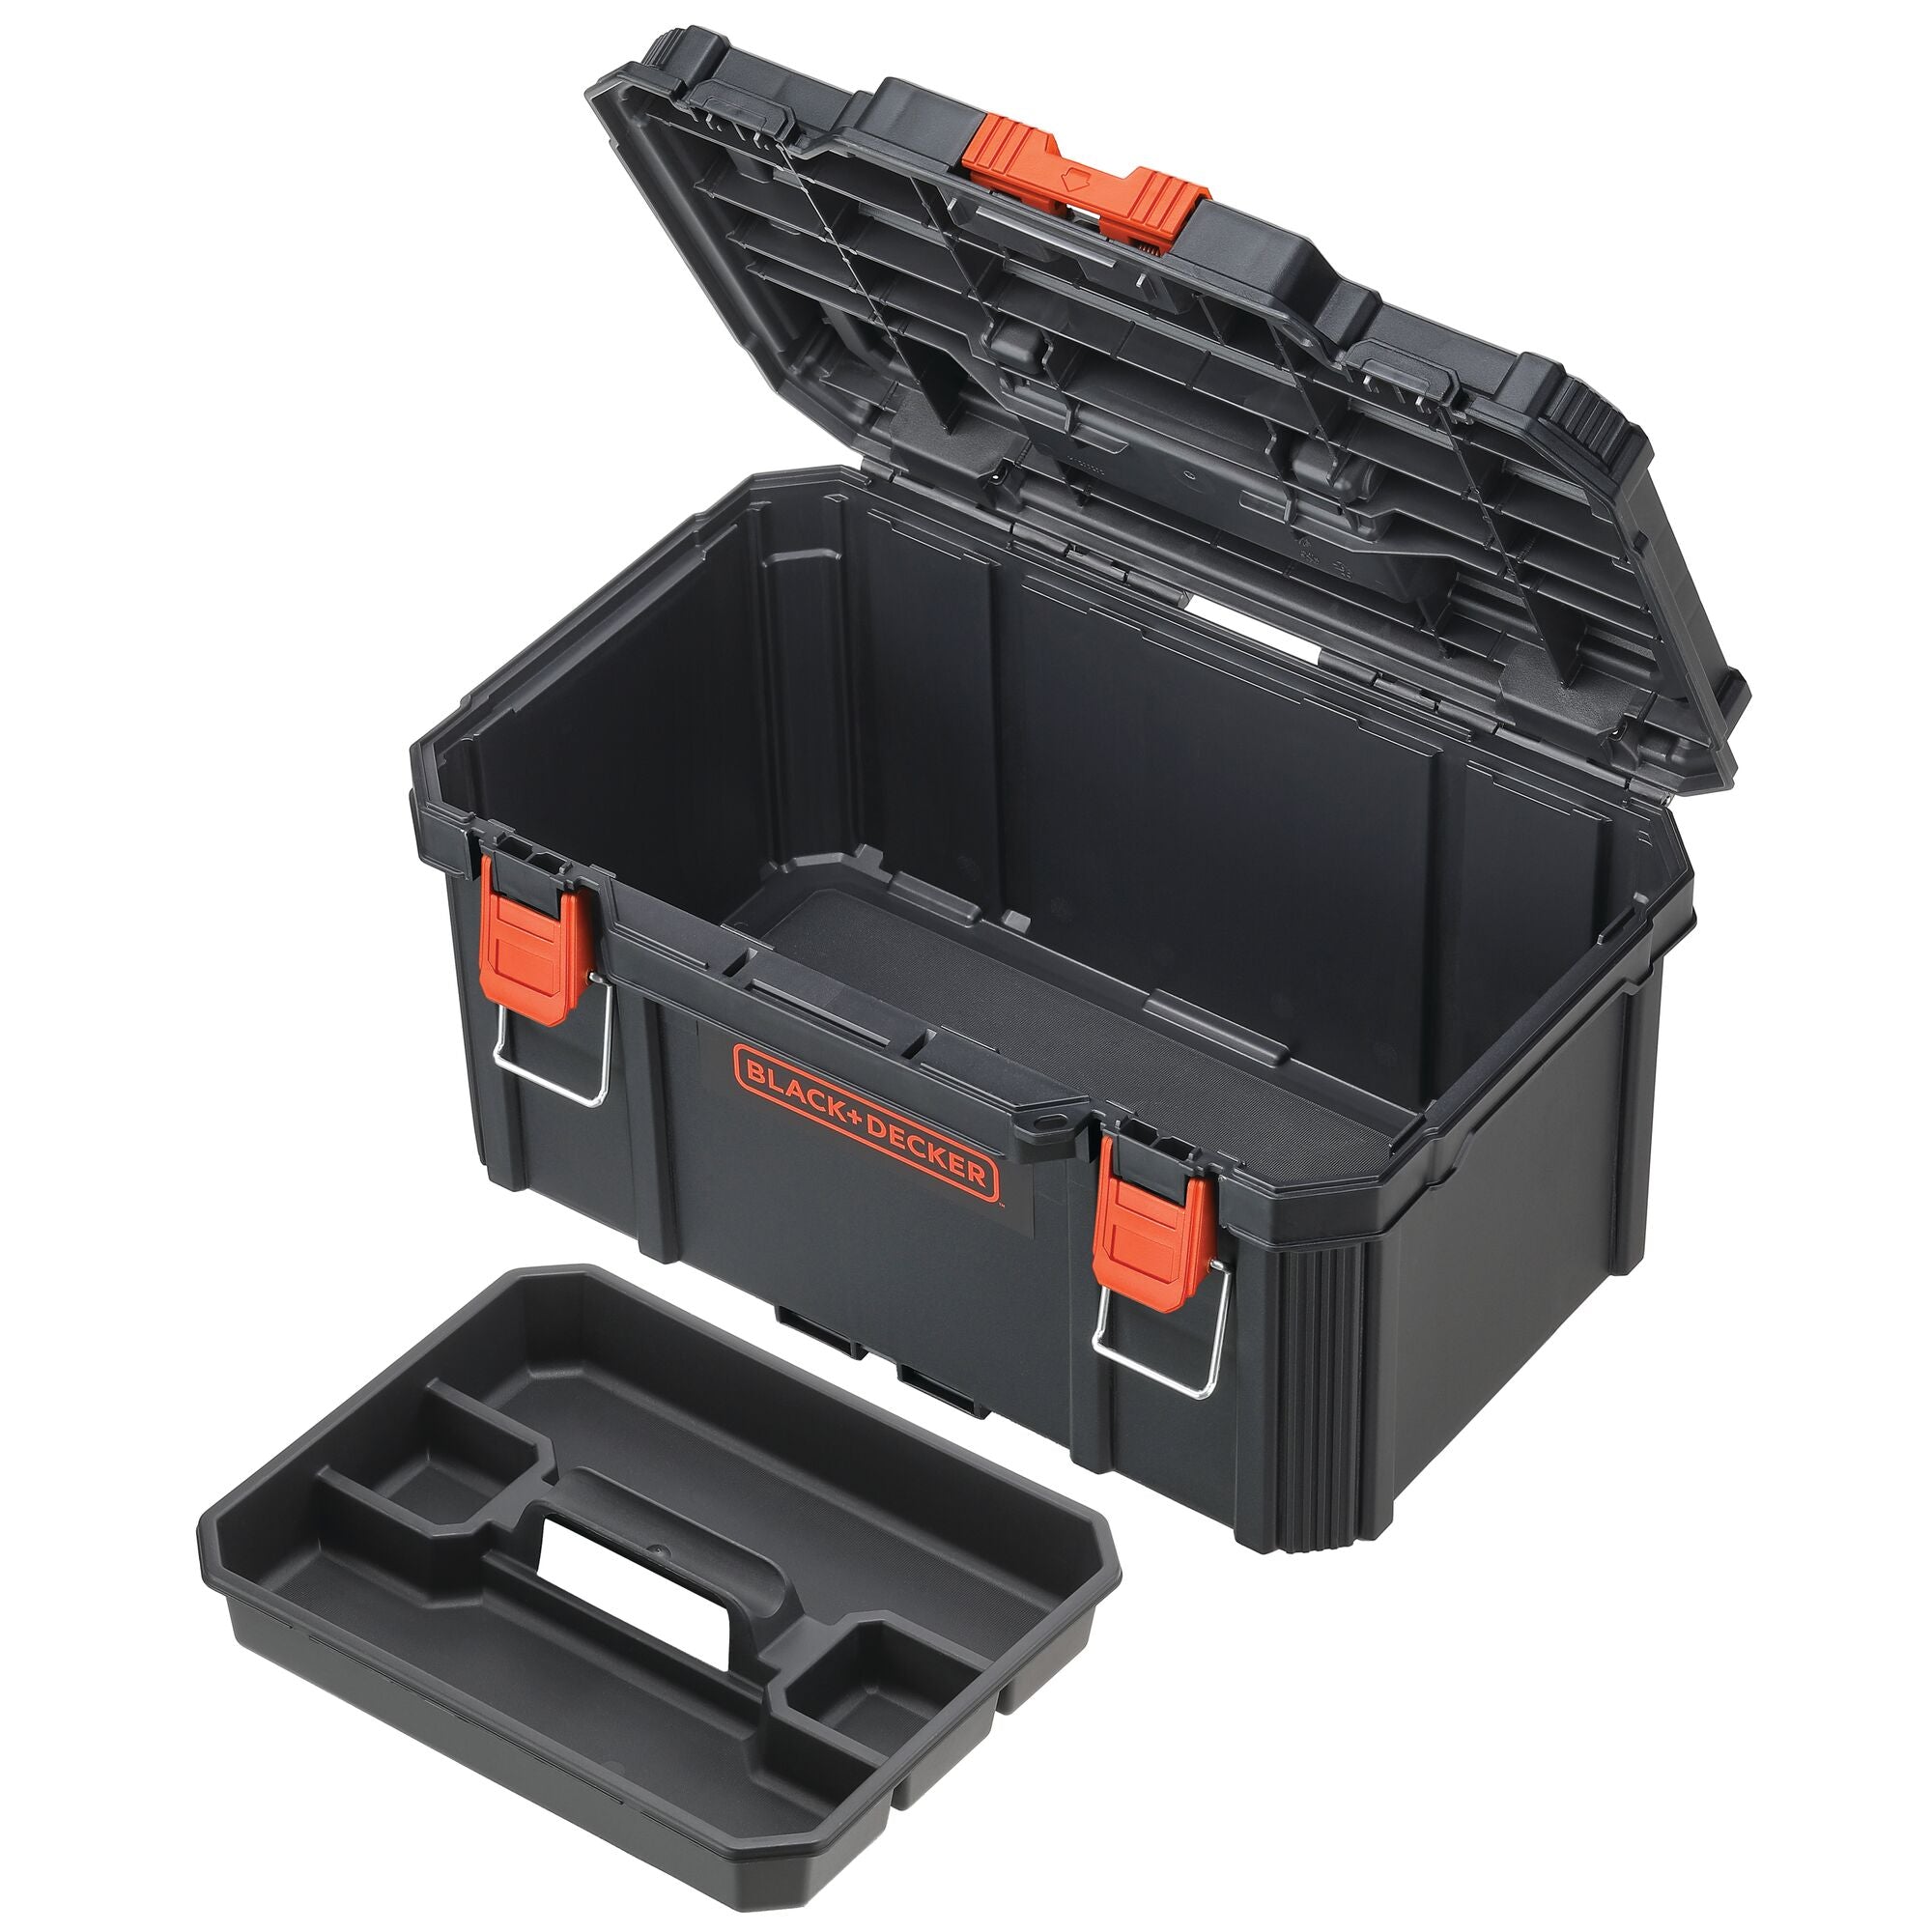 beyond by BLACK+DECKER BLACK+DECKER BDST60500APB Stackable Storage System -  3 Piece Set (Small Toolbox, Deep Toolbox, and Rolling Tote)